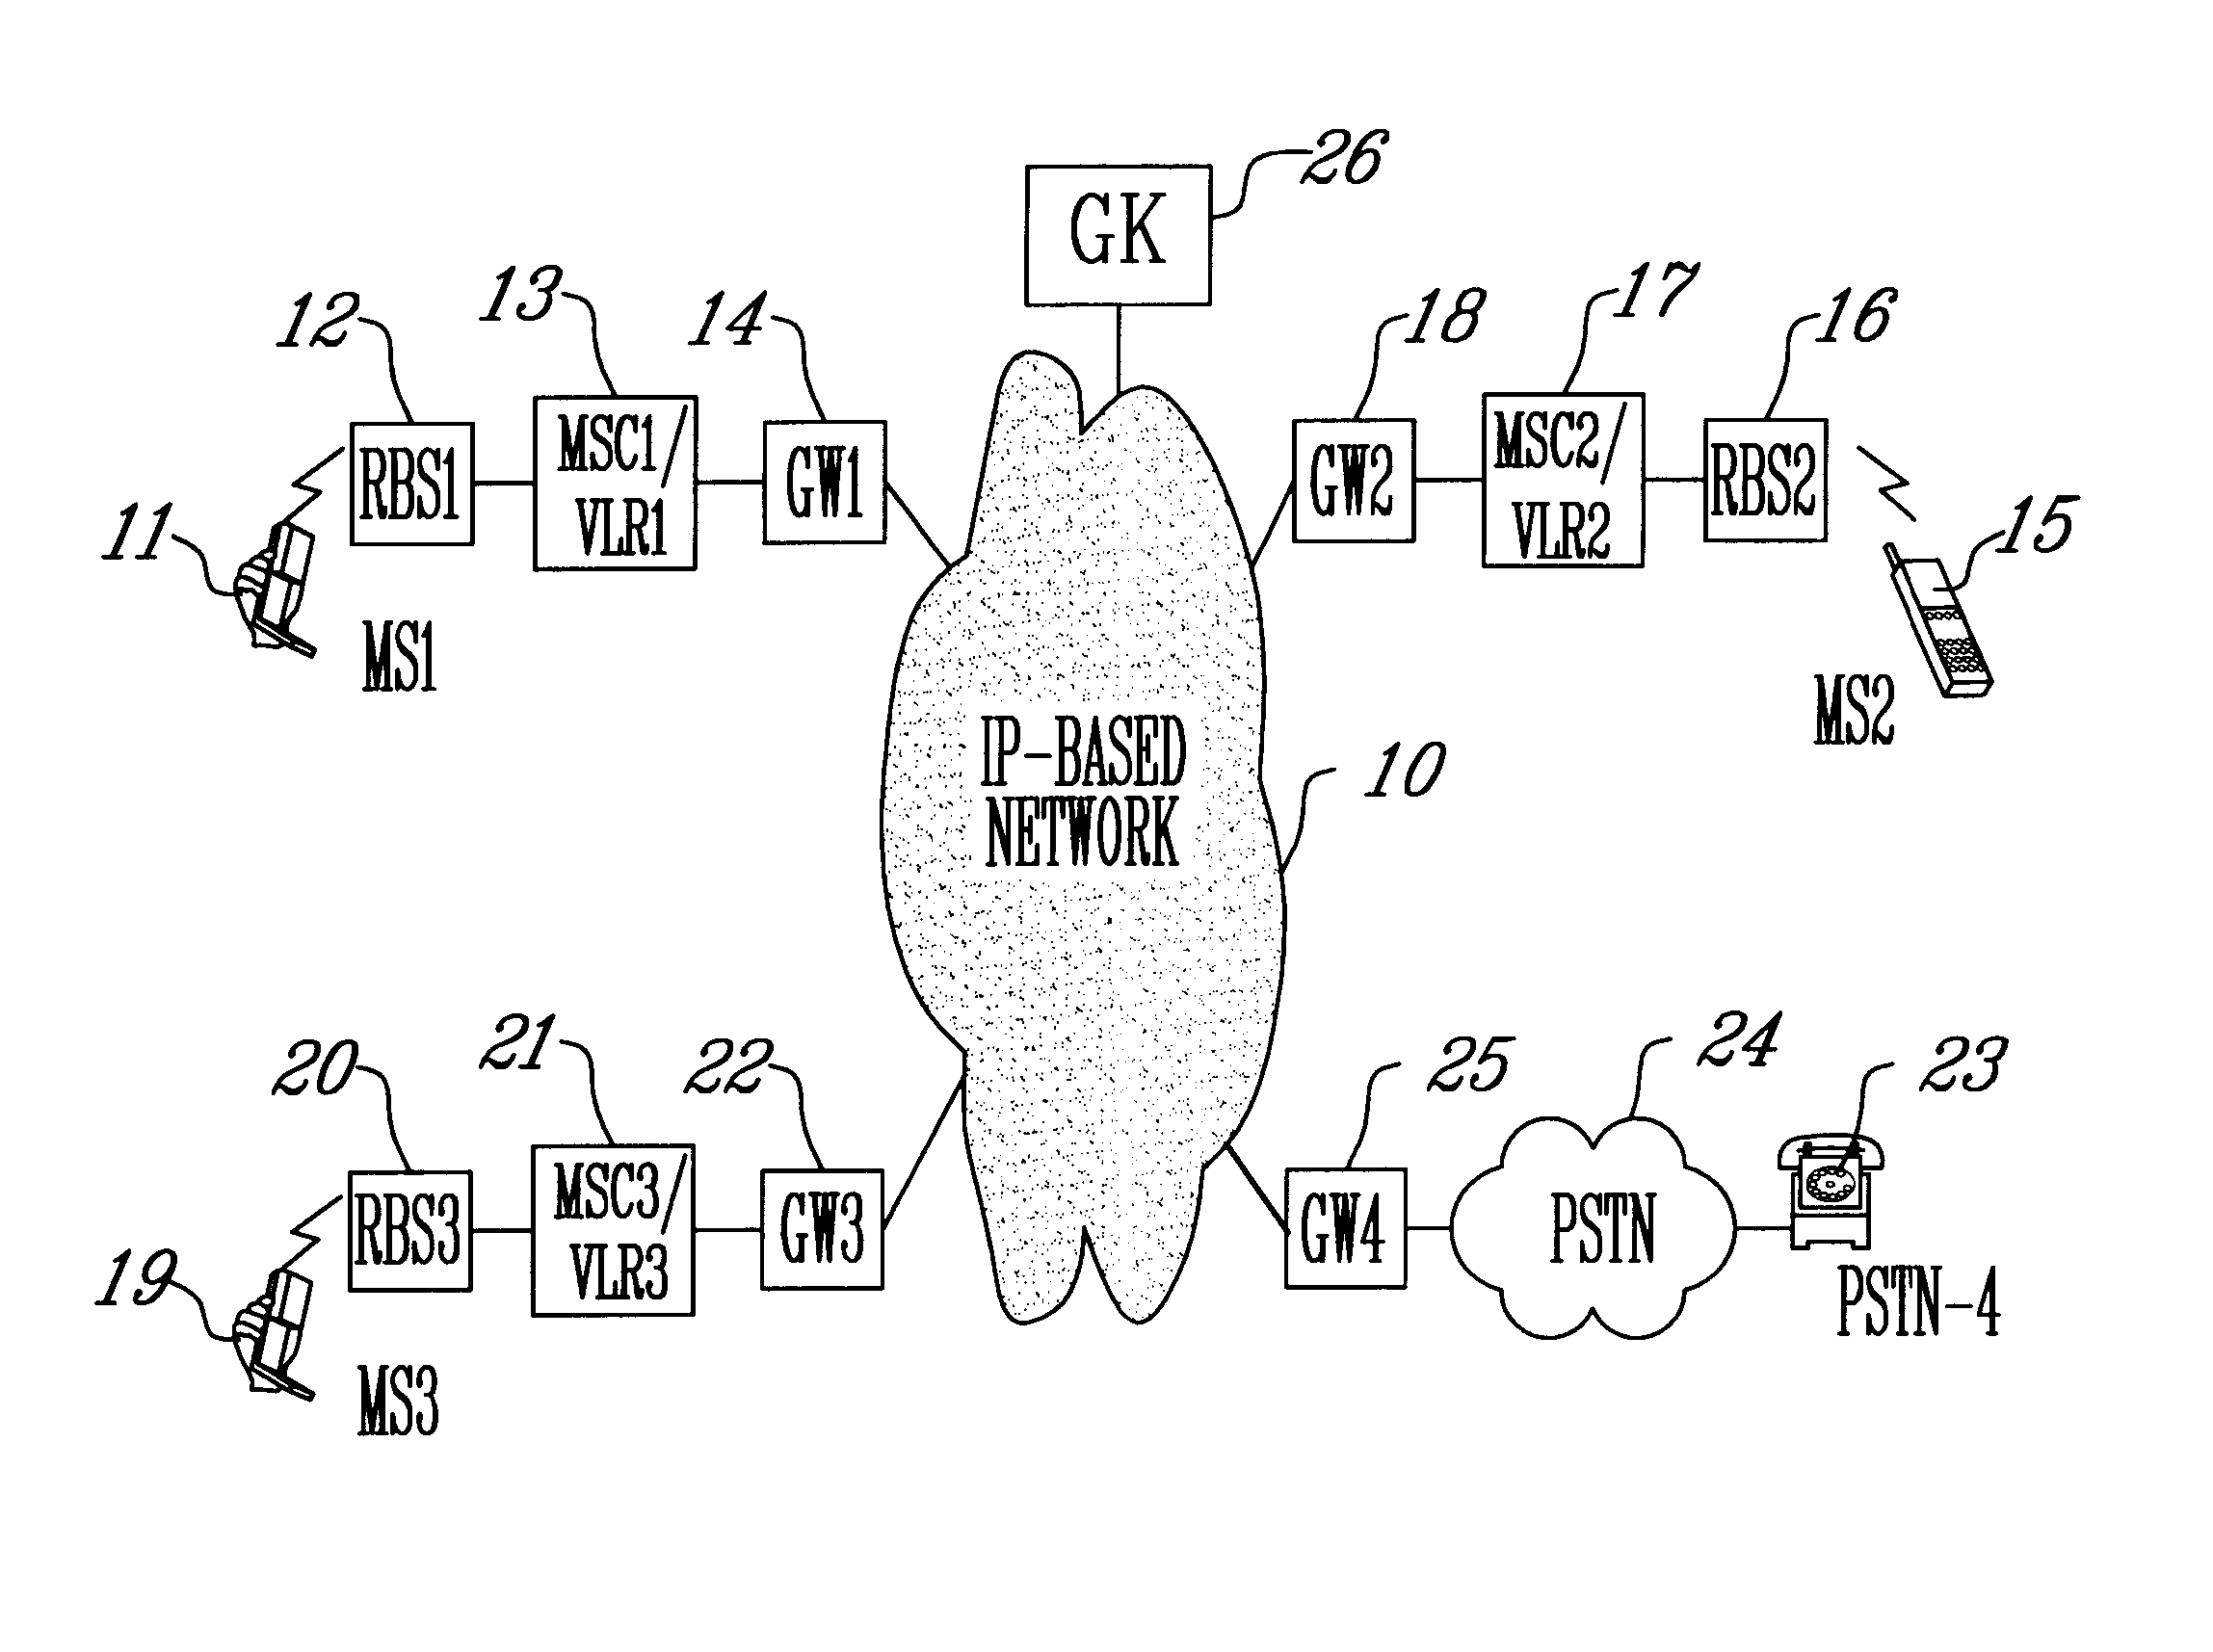 System and method of minimizing the number of voice transcodings during a conference call in a packet-switched network